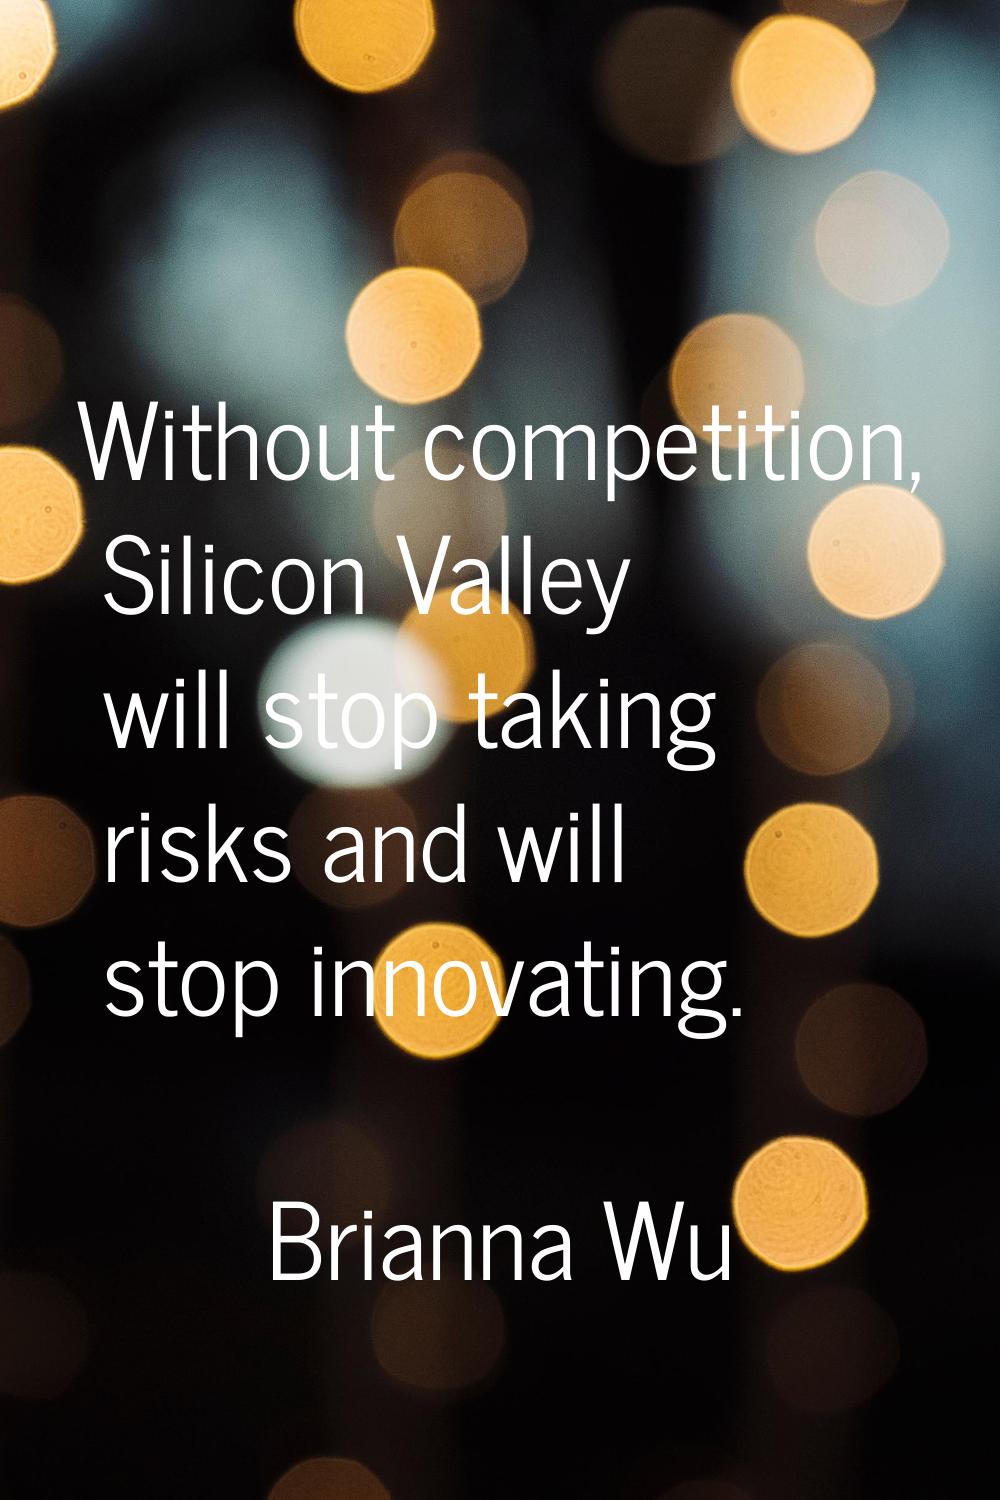 Without competition, Silicon Valley will stop taking risks and will stop innovating.